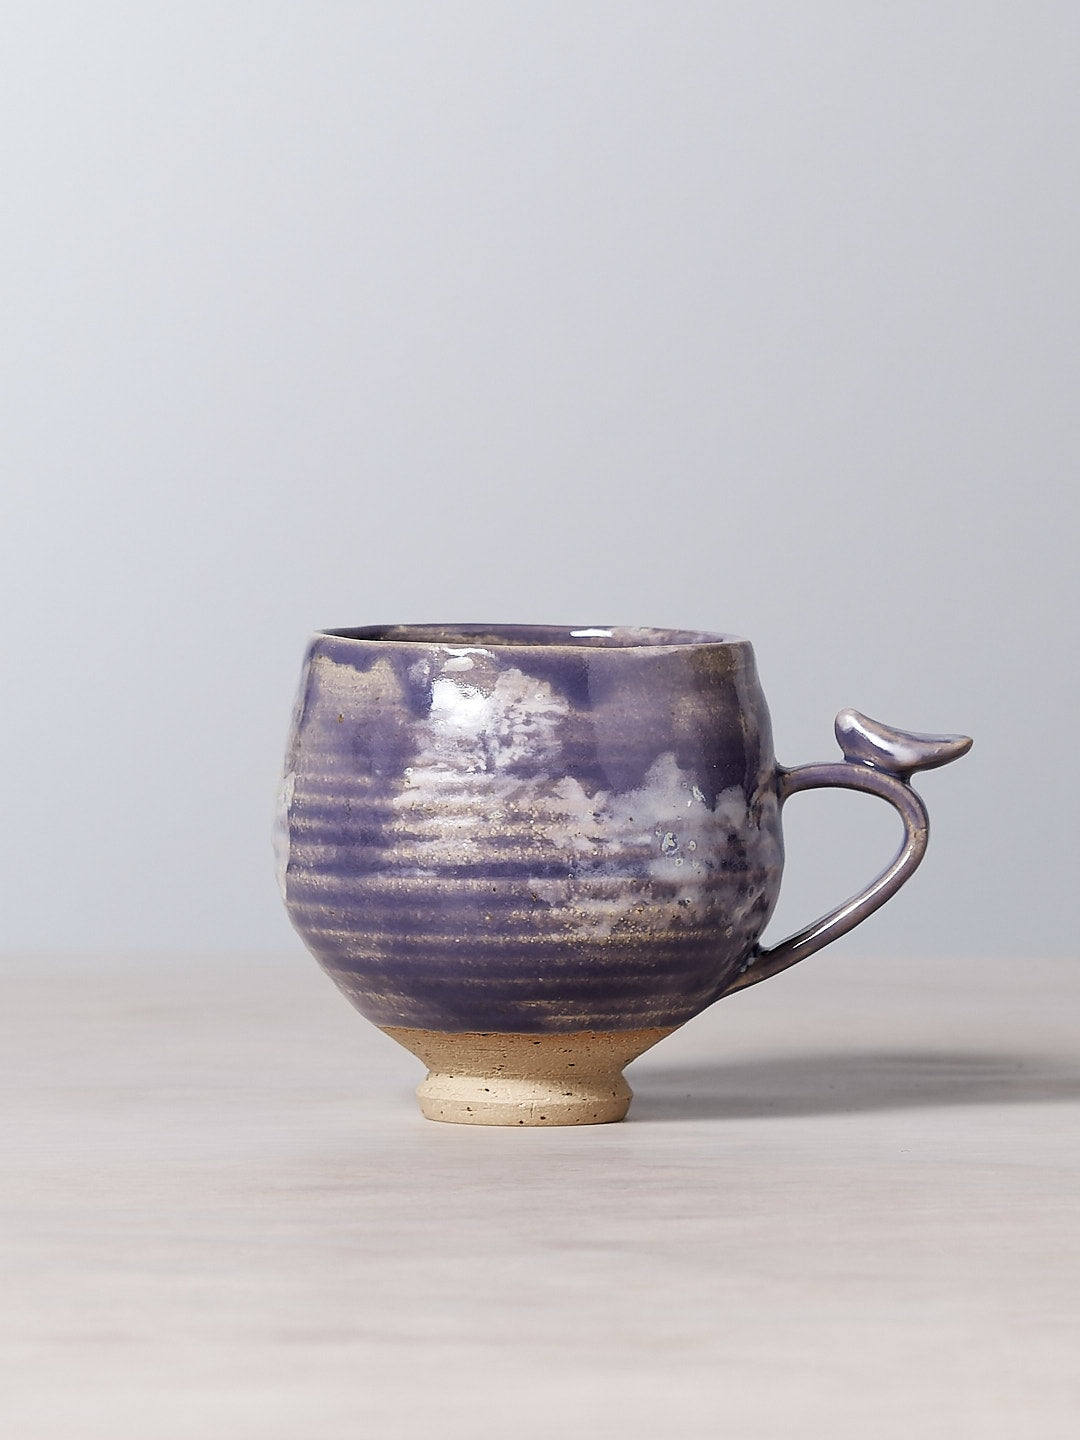 A blue and white Bird Handle Cup – Pukeko with a handle on a table, made by Jino Ceramic Studio.